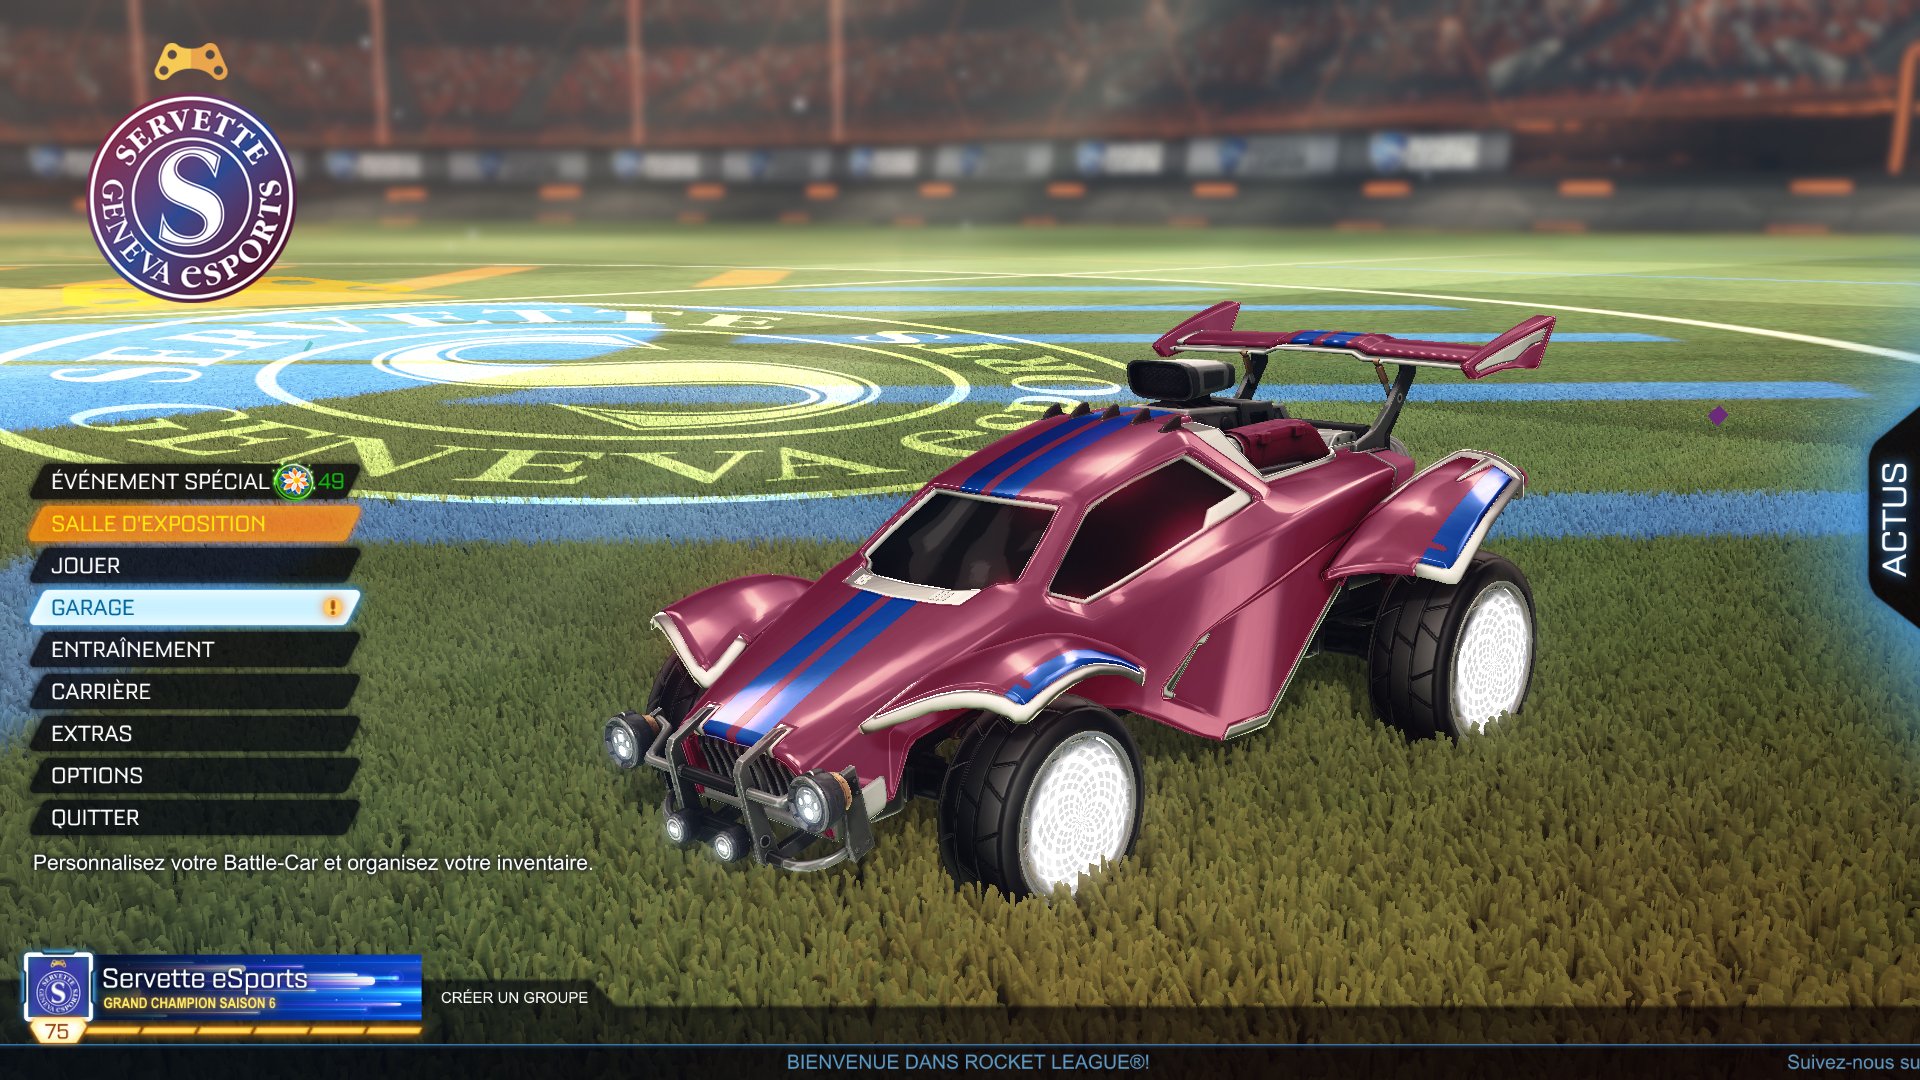 Servette Geneva Esports on Twitter: "🌟To celebrate our participation in the Rocket Championship Series @RLEsports we are giving titanium white Zombas 🌟 ☑️-RETWEET ☑️-LIKE TO ENTER in the giveaway